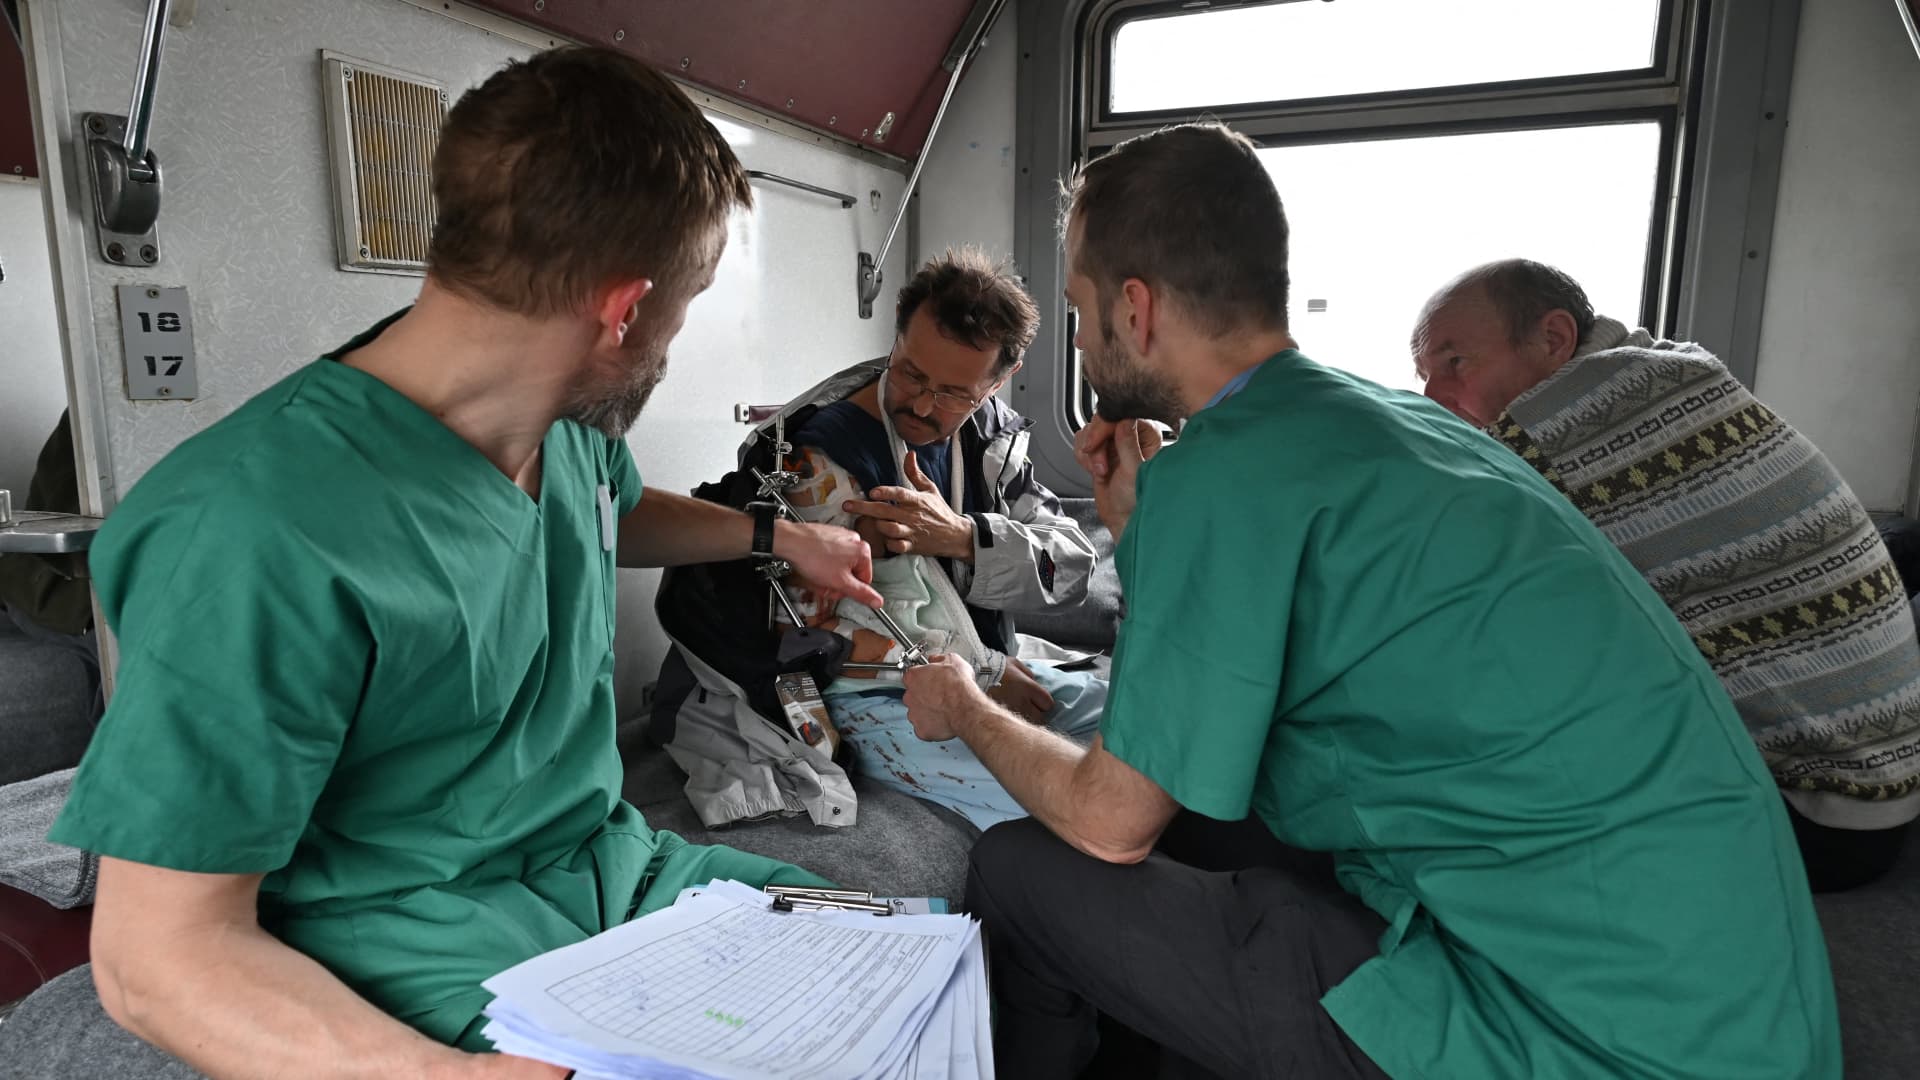 MSF doctors Stig Walravens (2nd R), 33, and Yaroslav (L), 39, care for Oleh, 58, a patient on a medical evacuation train on its way to the western Ukrainian city of Lviv on April 10, 2022.